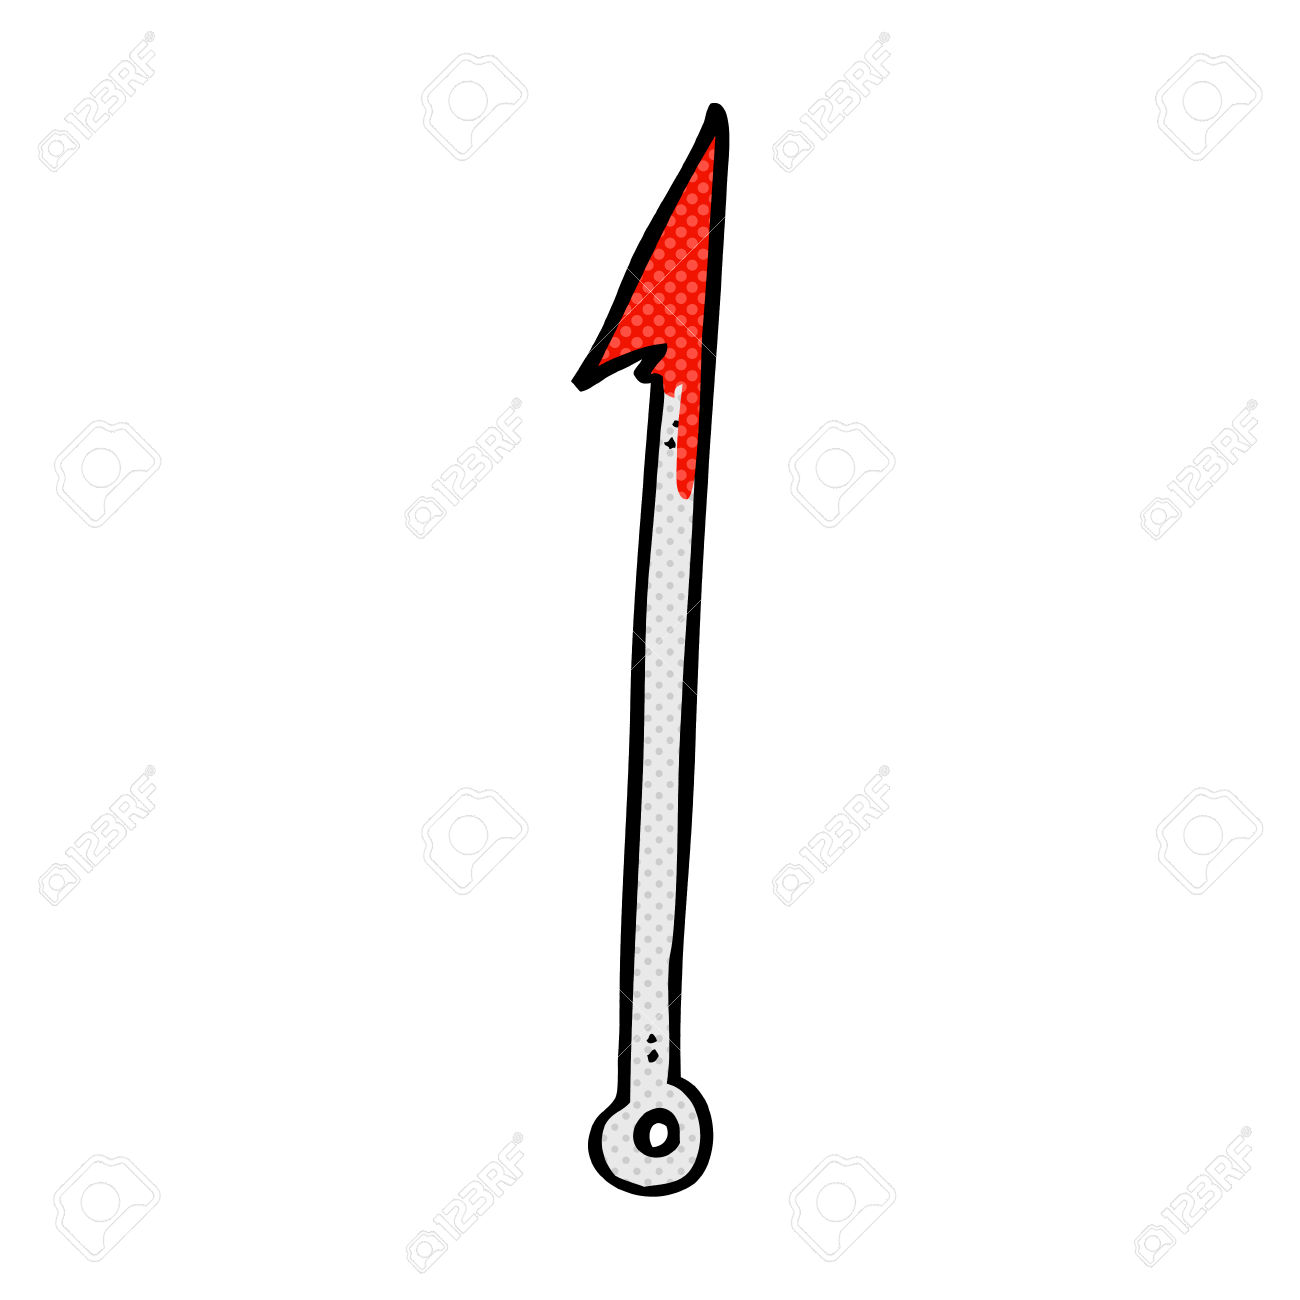 Harpoon clipart #3, Download drawings